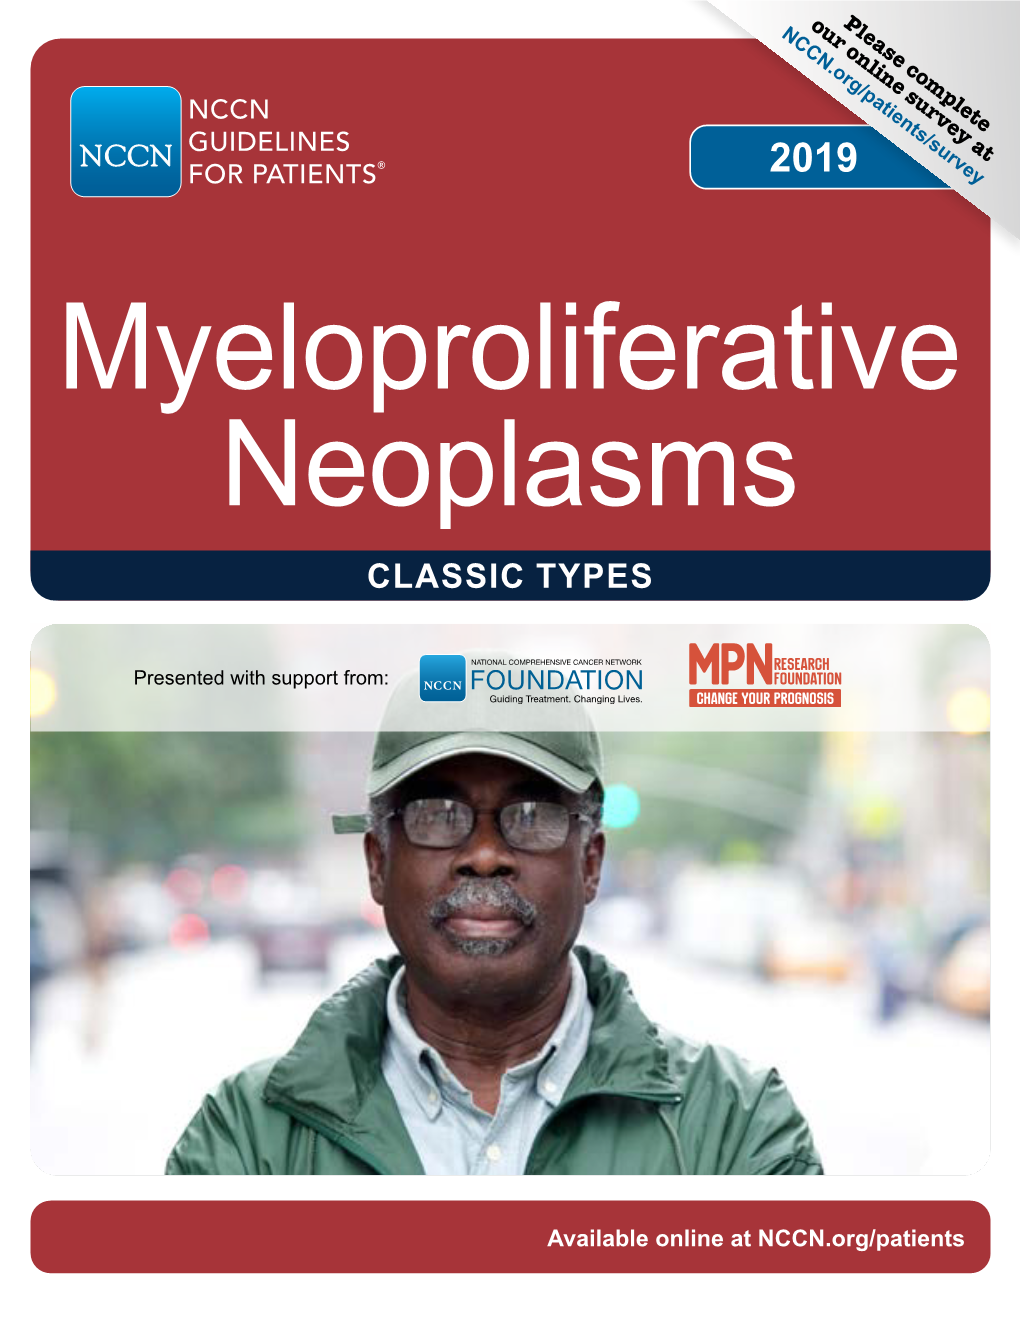 NCCN Guidelines for Patients Myeloproliferative Neoplasms